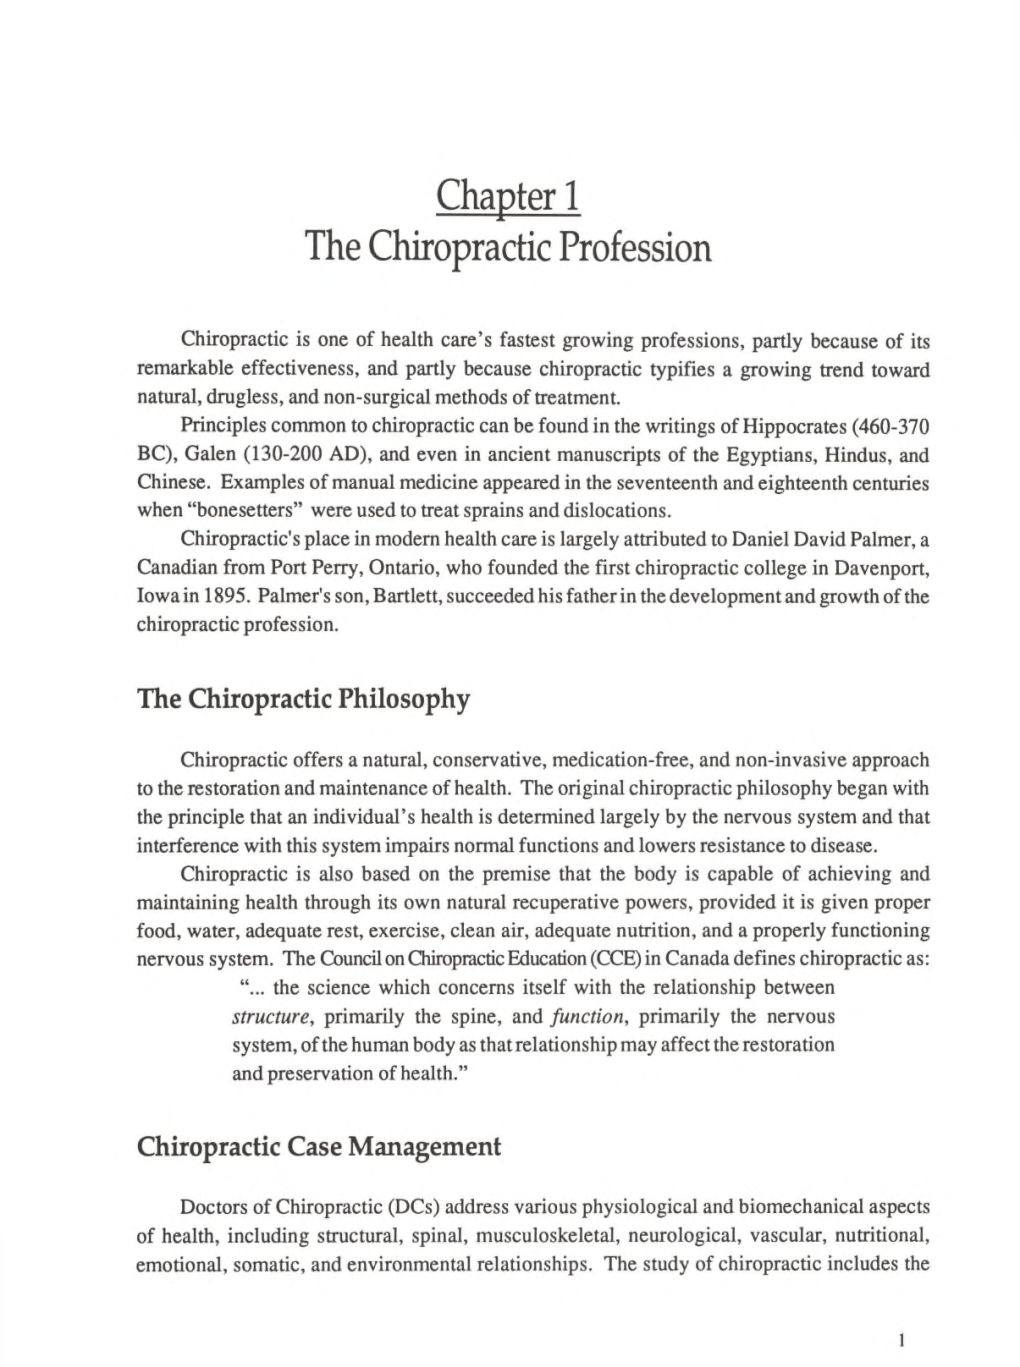 Chapter 1 the Chiropractic Profession